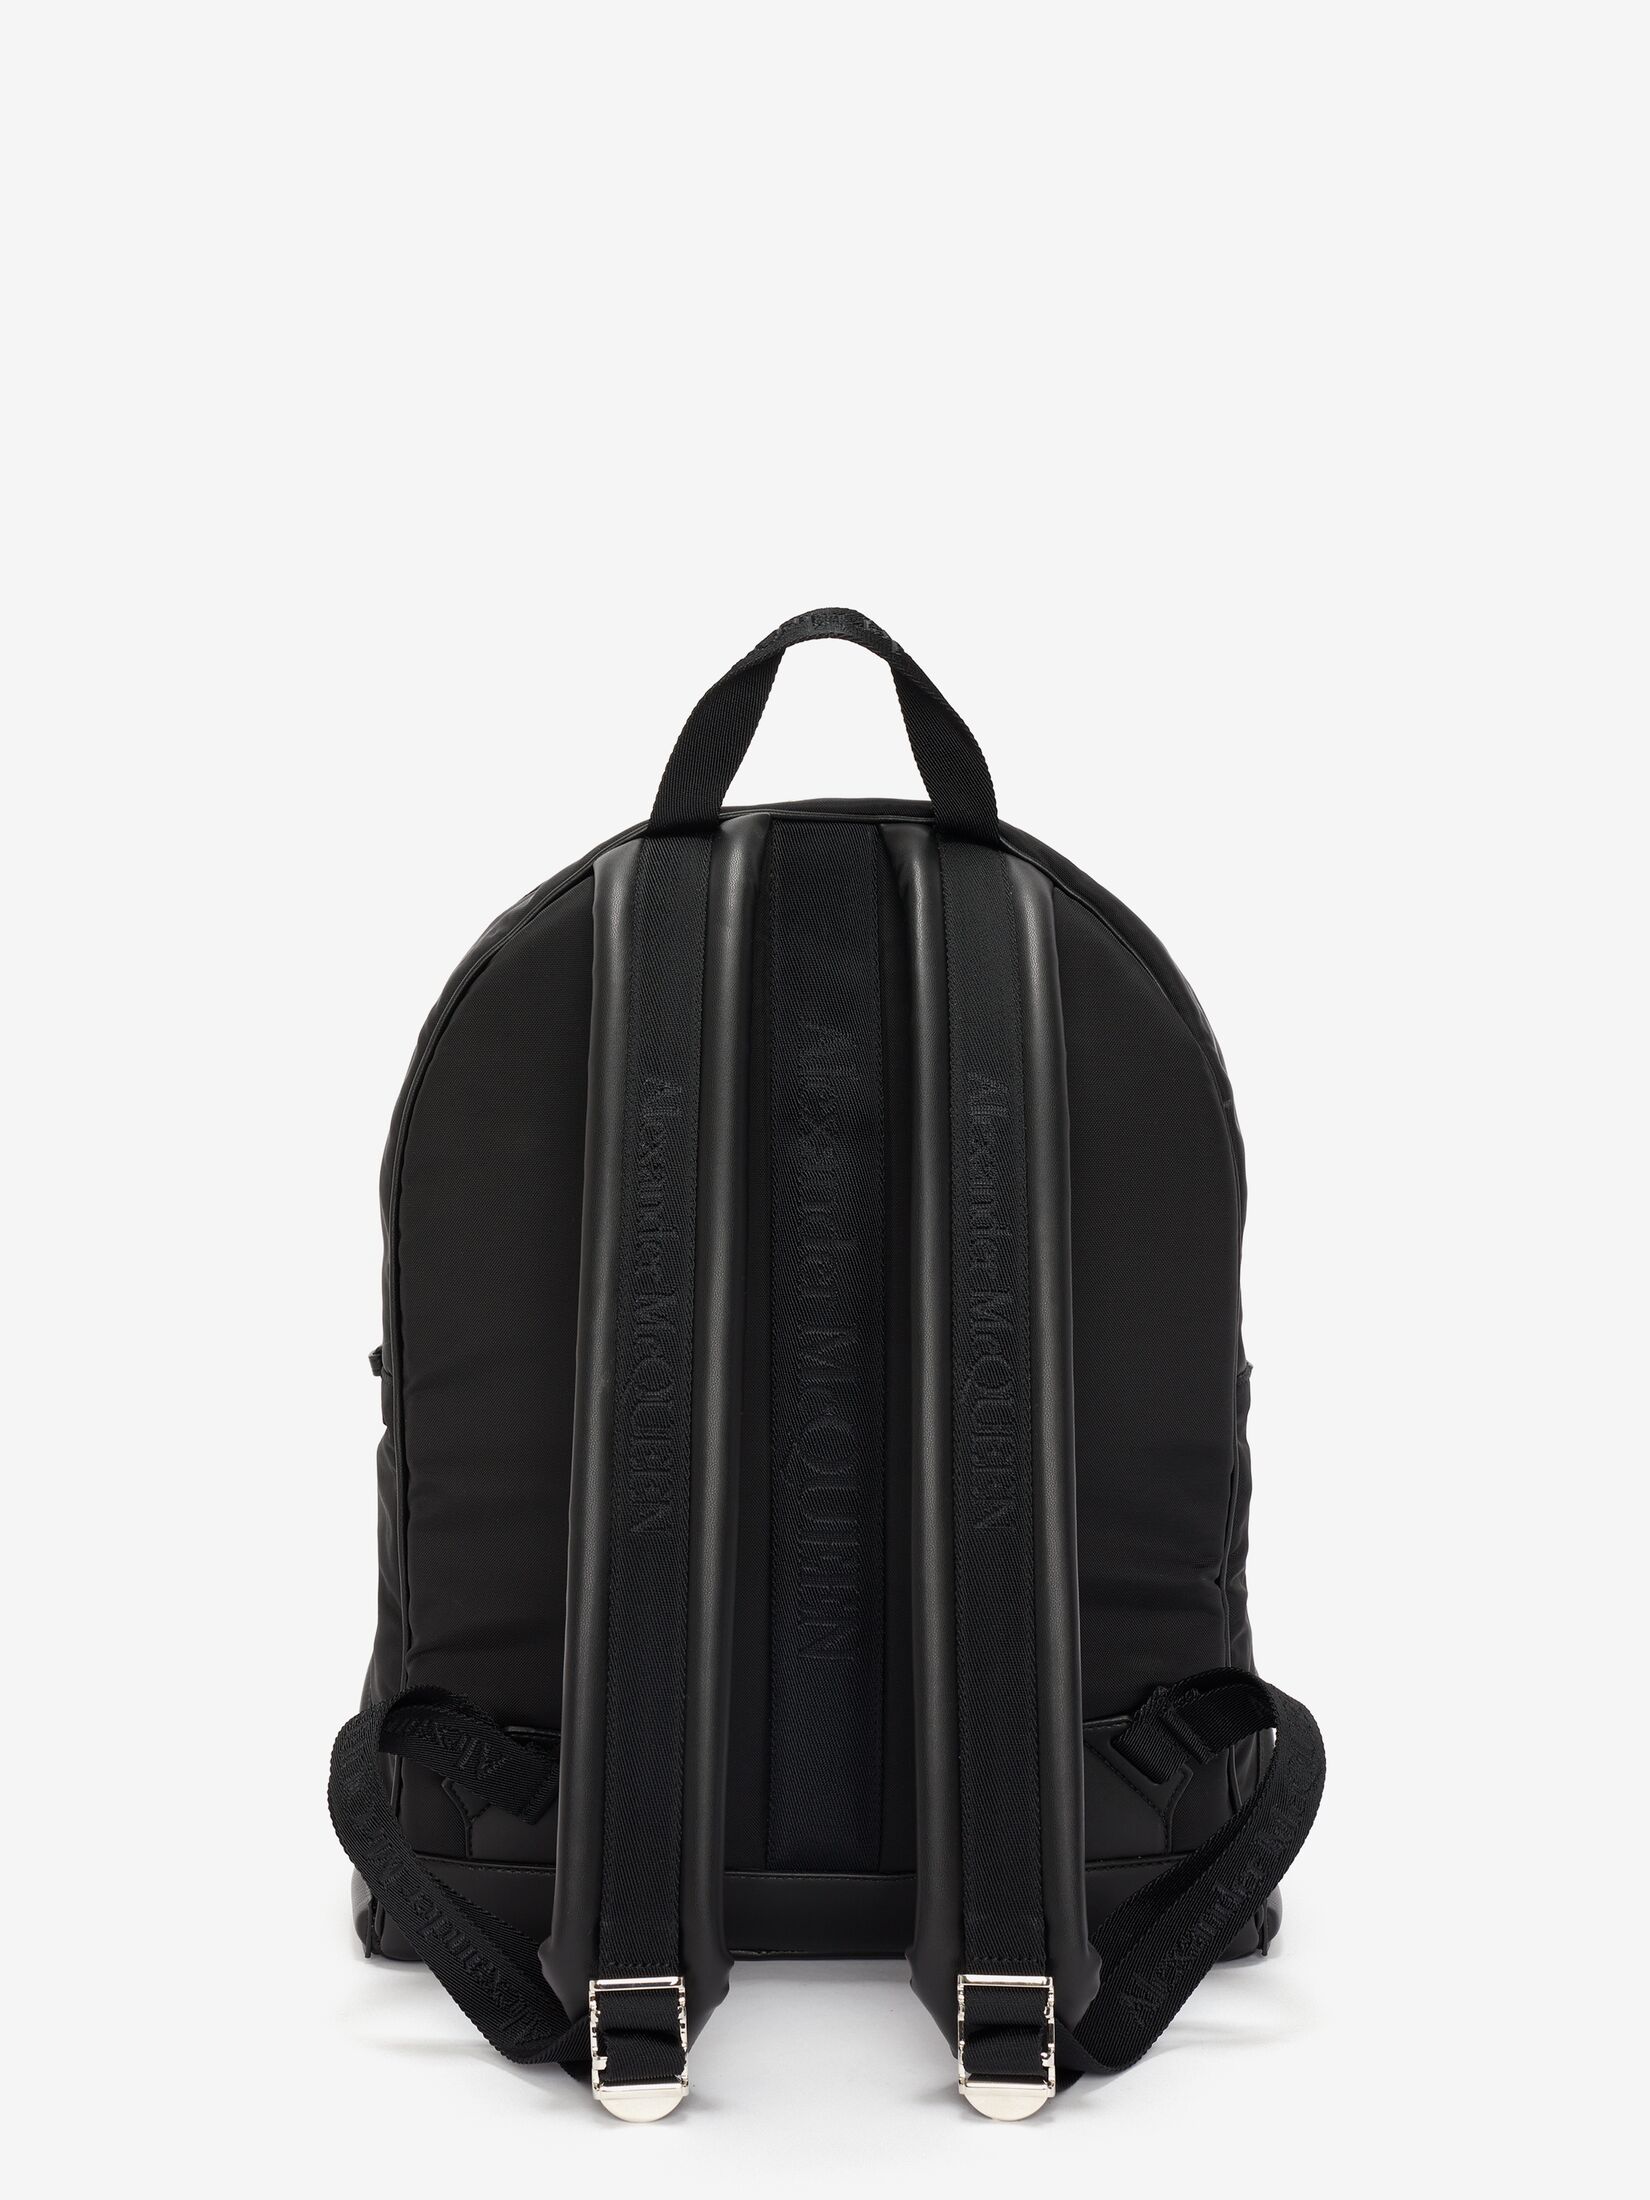 The Harness backpack